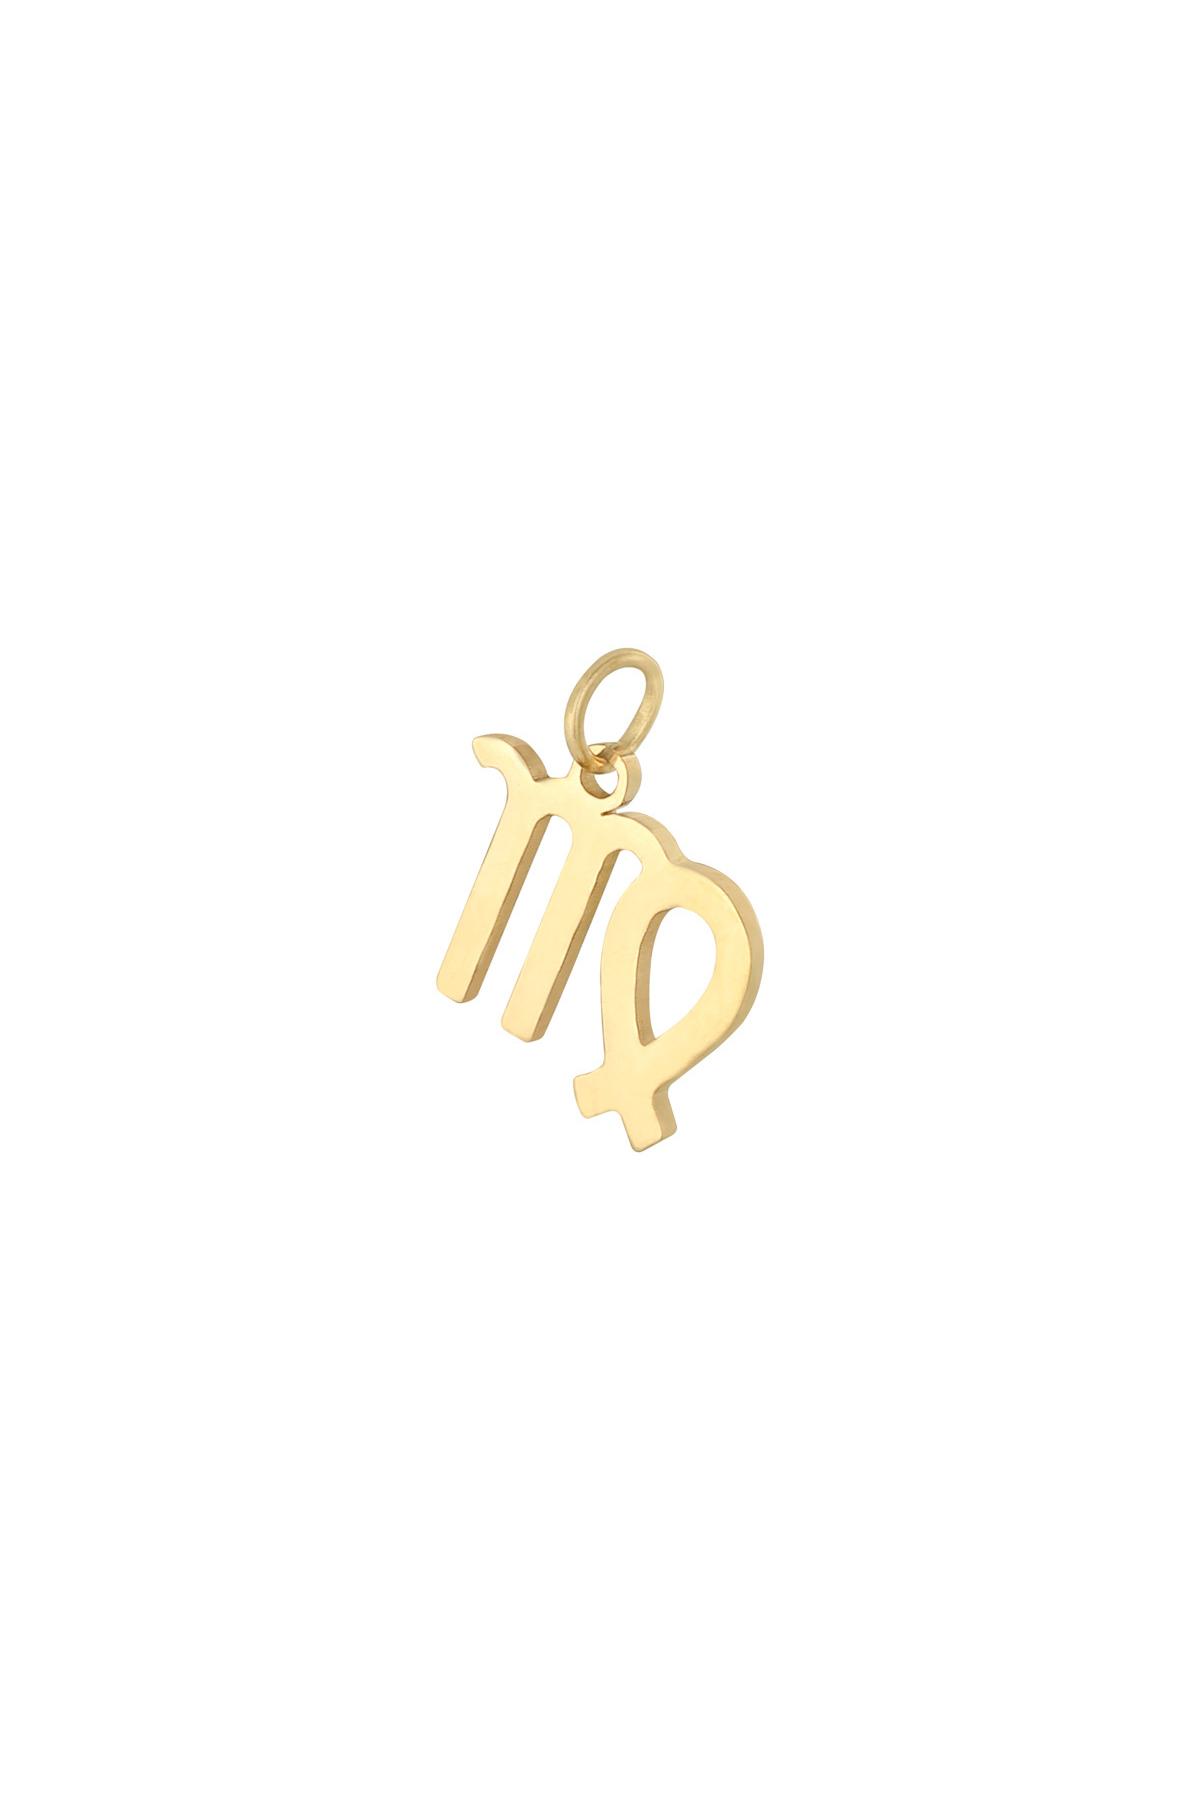 Gold / Charm Zodiac Virgo Gold Stainless Steel Picture17